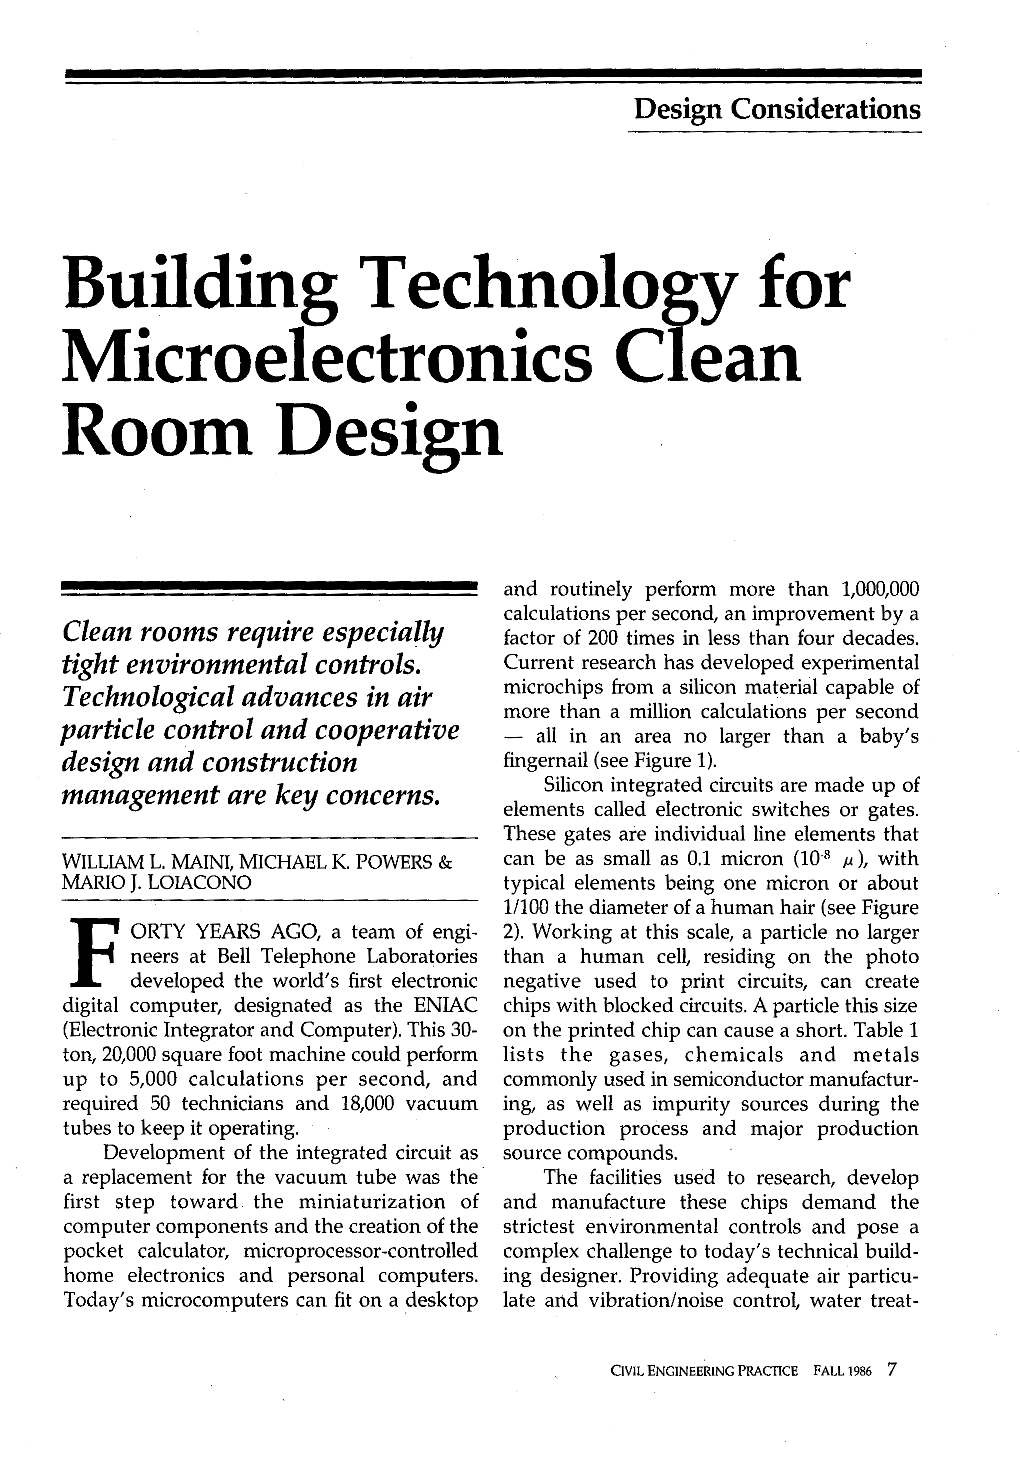 Building Technology for Microelectronics Clean Room Design